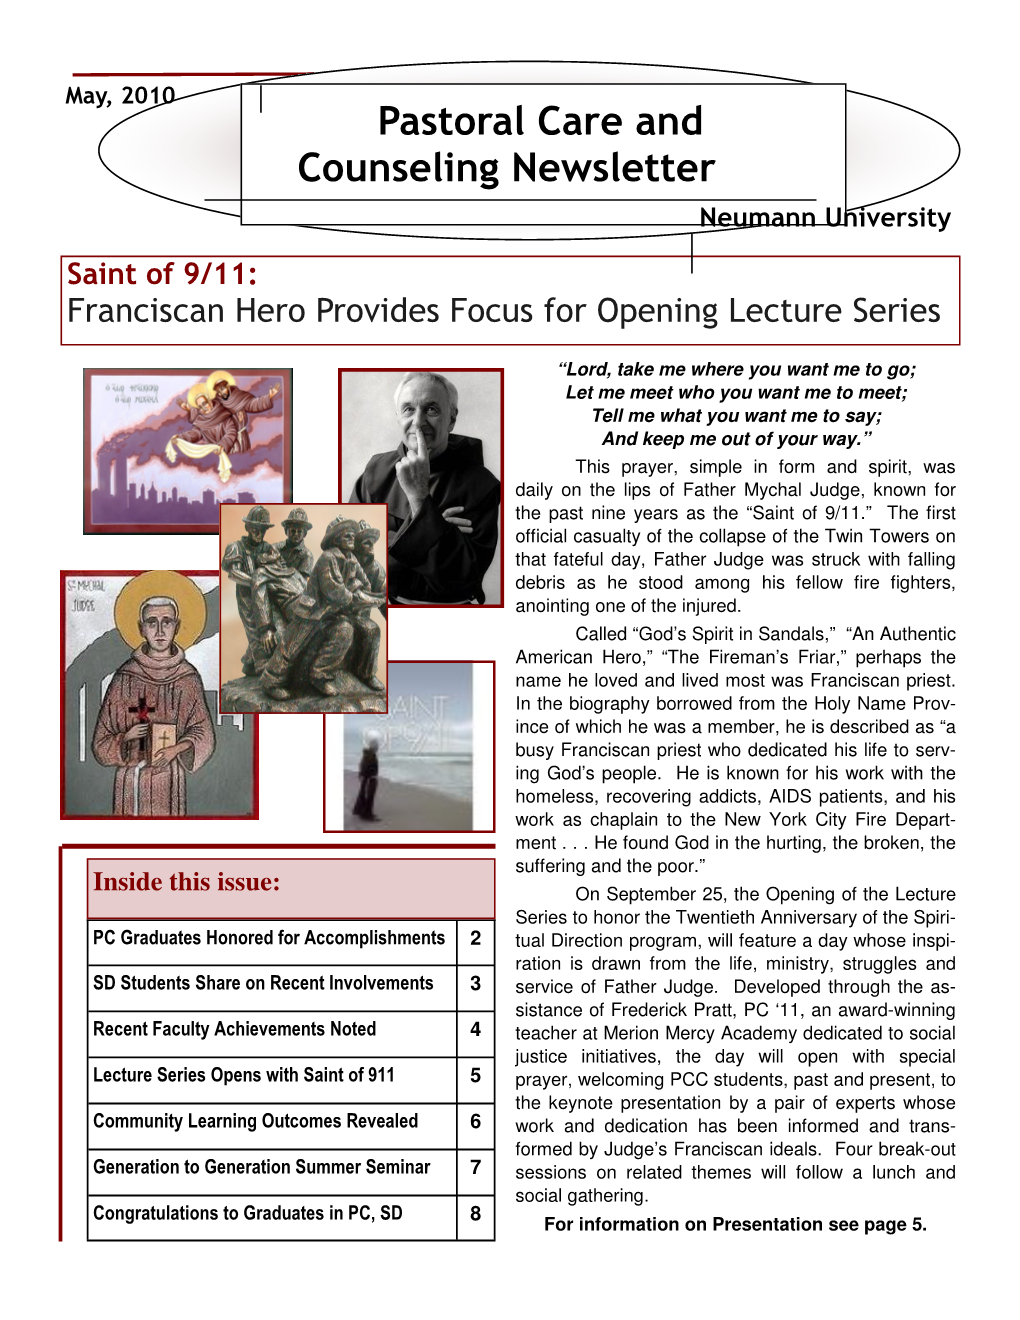 Pastoral Care and Counseling Newsletter Mrs